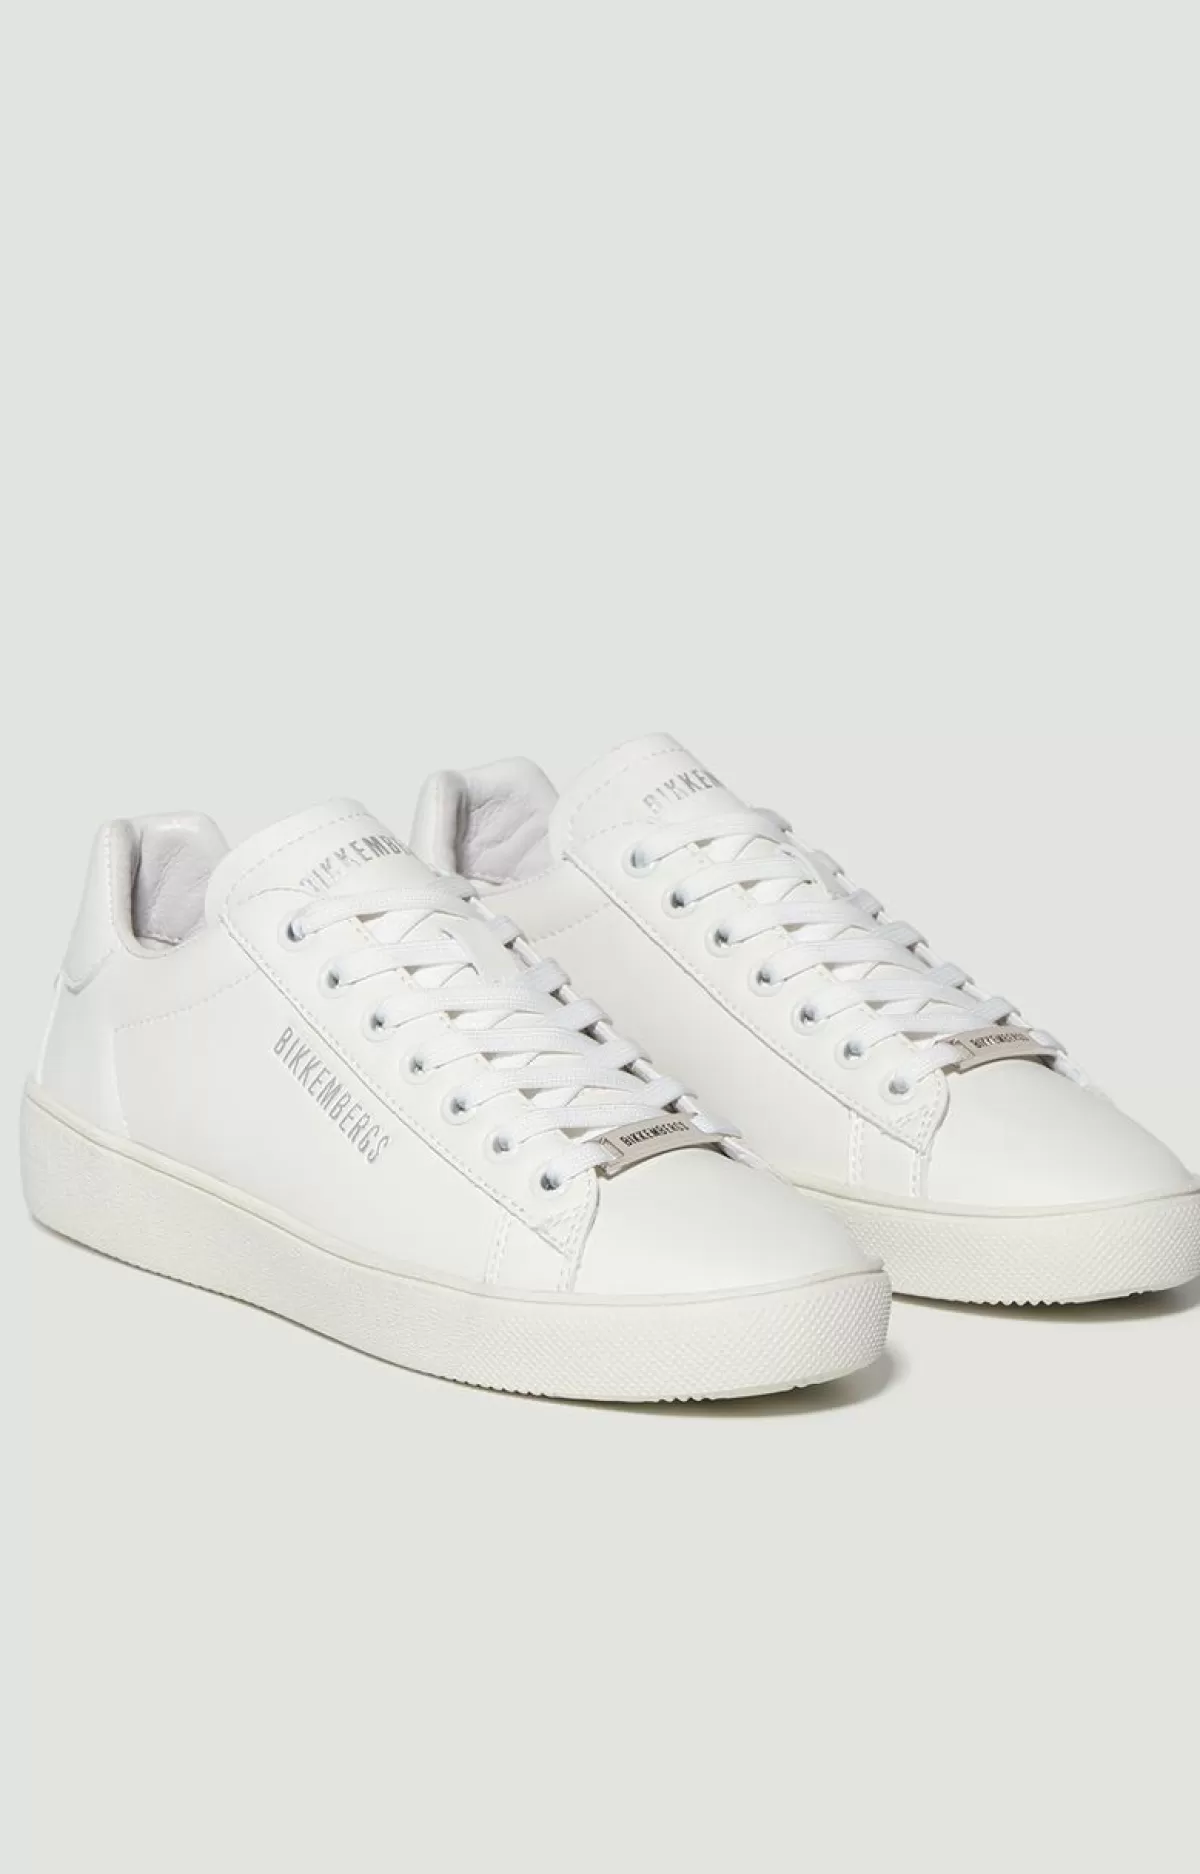 Bikkembergs Women'S Sneakers - Recoba W White/Silver Outlet